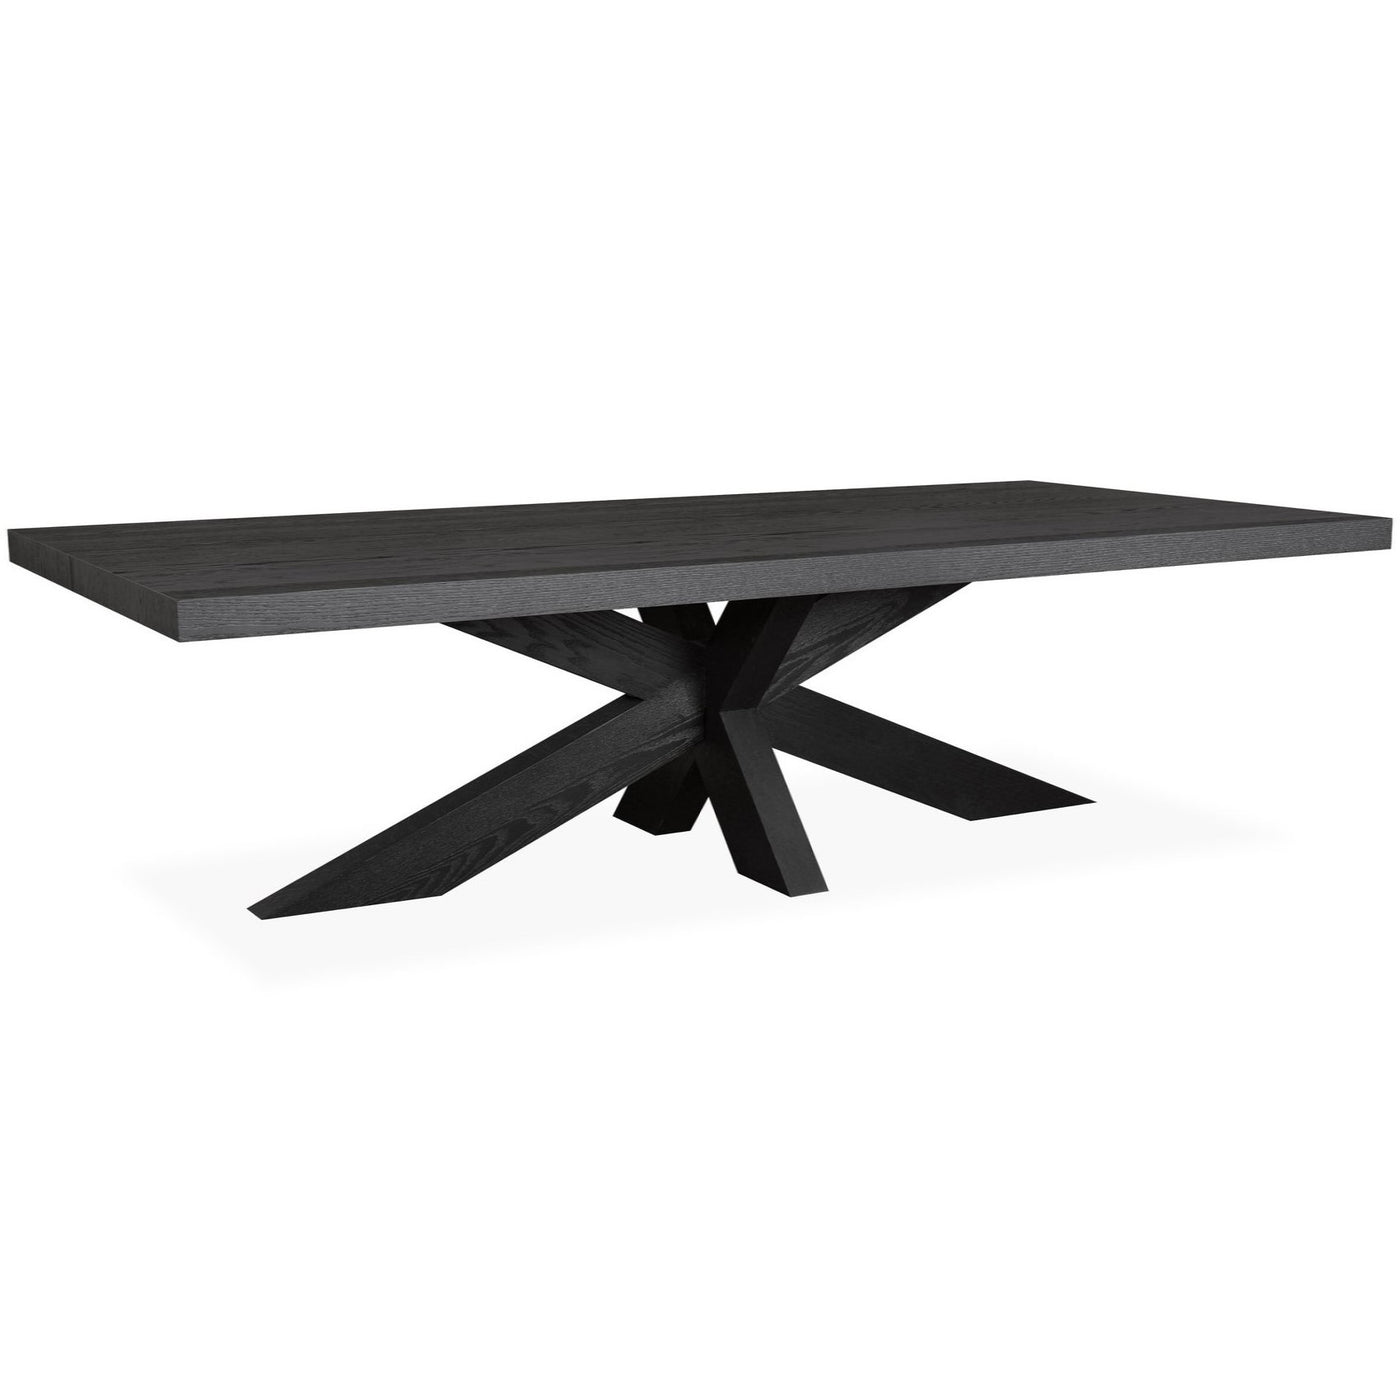 Cubano Rectangle Dining Table - 2.8m